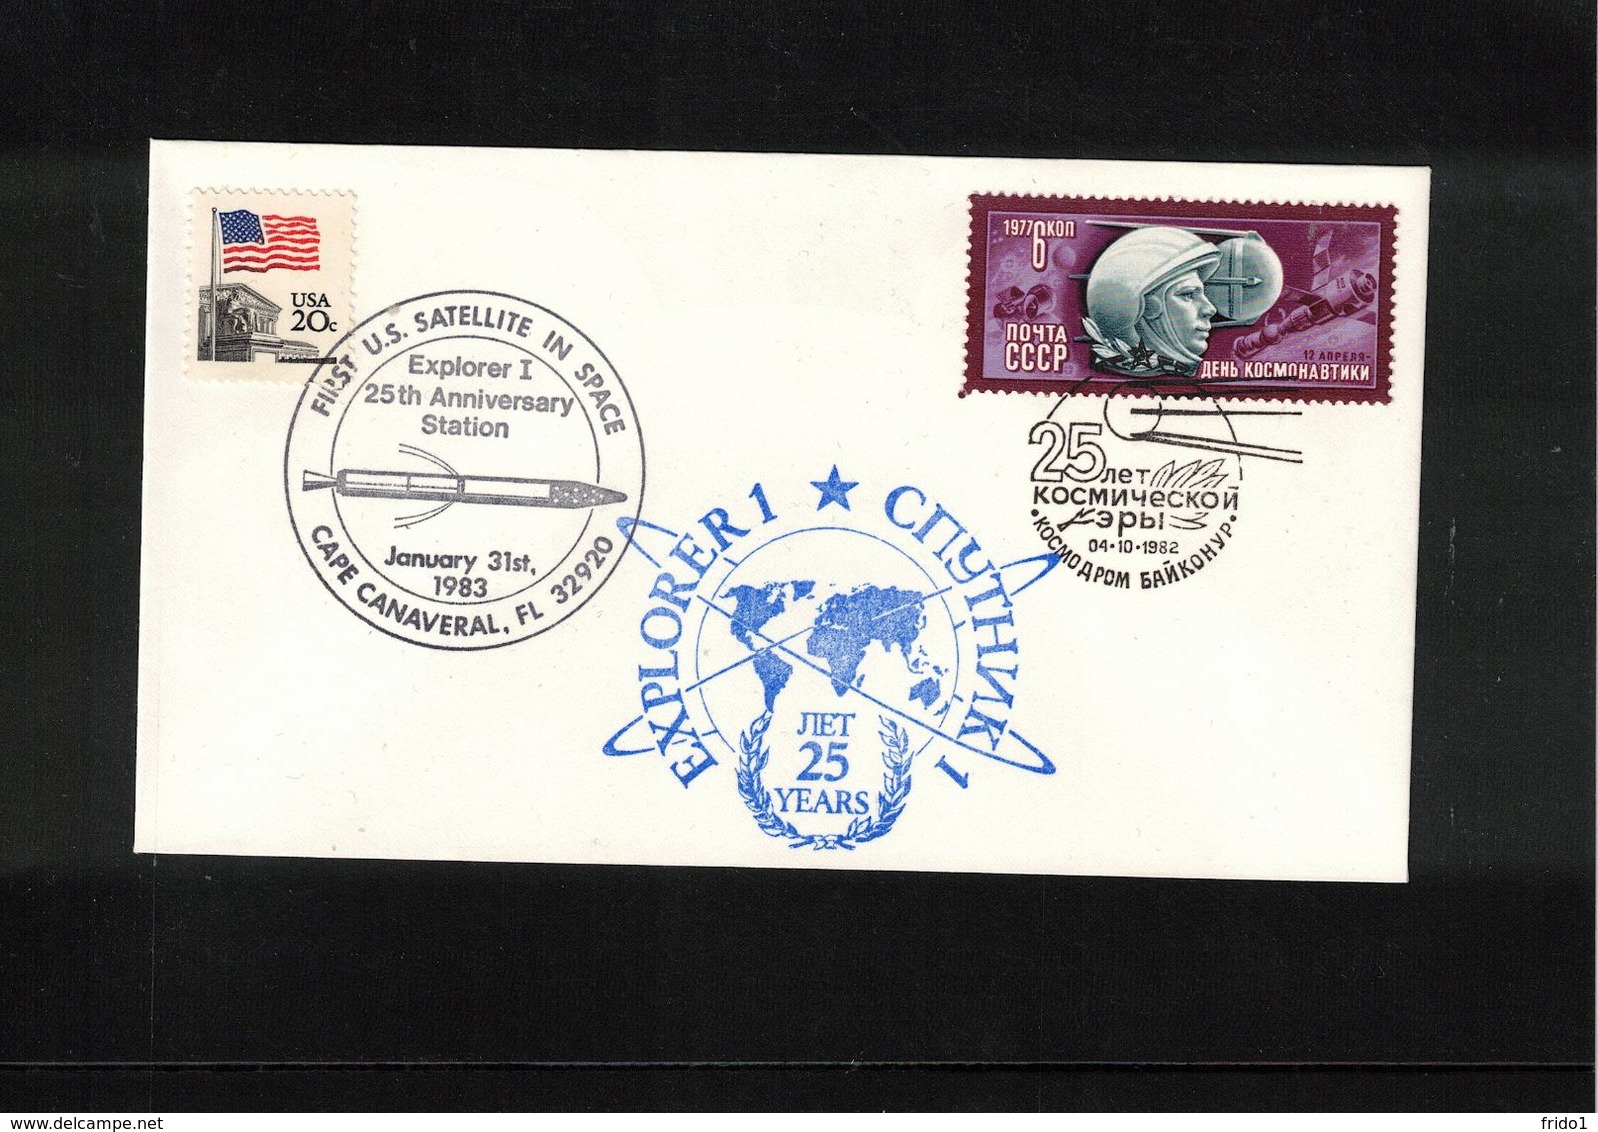 USA + Russia USSR 1983 Space / Raumfahrt Explorer 1 + Sputnik 1 First US And USSR Satellites In Space Interesting Letter - USA